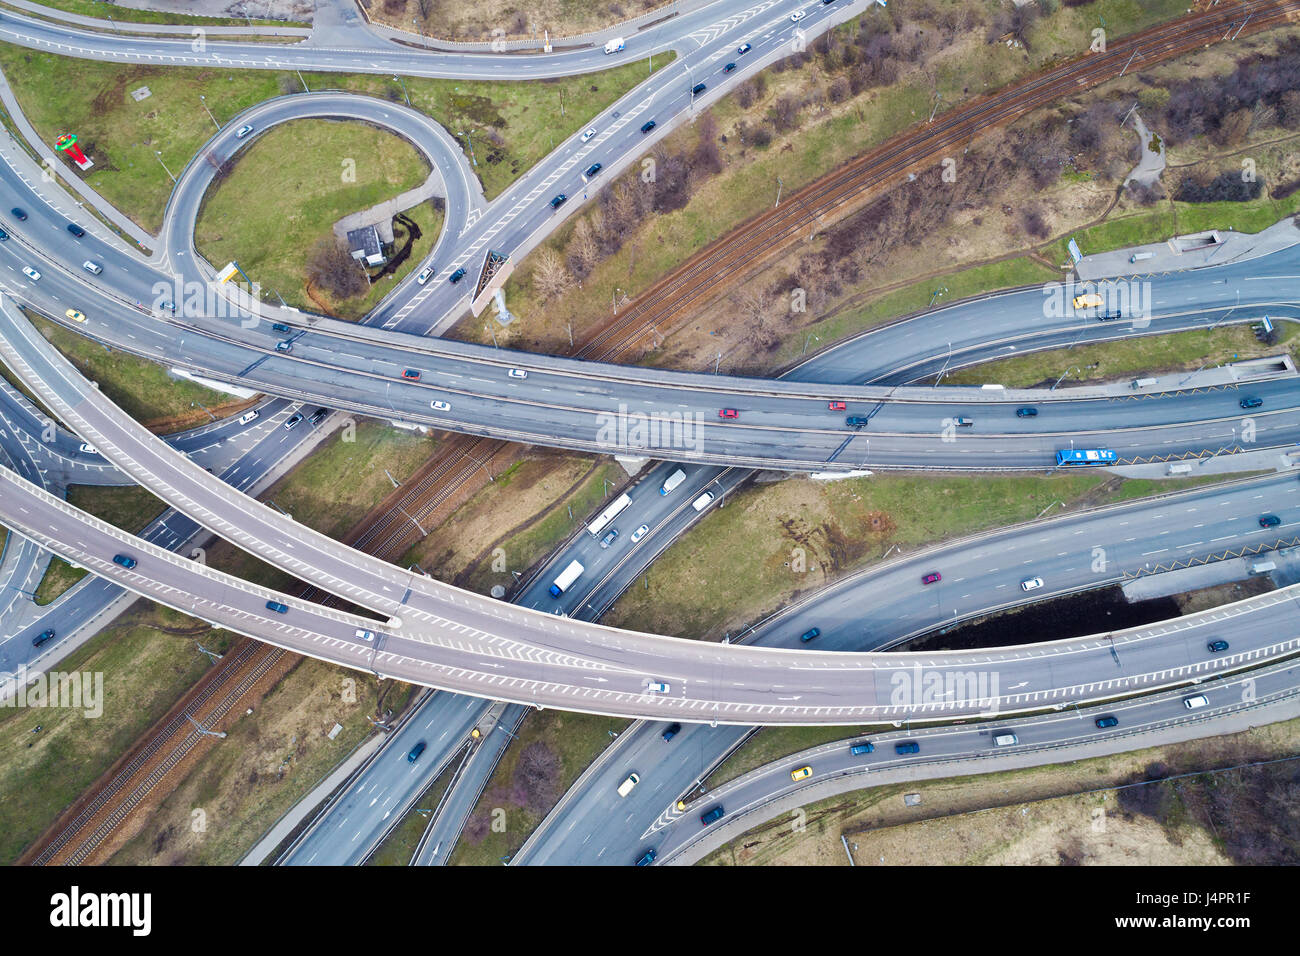 Aerial view of a freeway intersection. Aerial photography Stock Photo ...